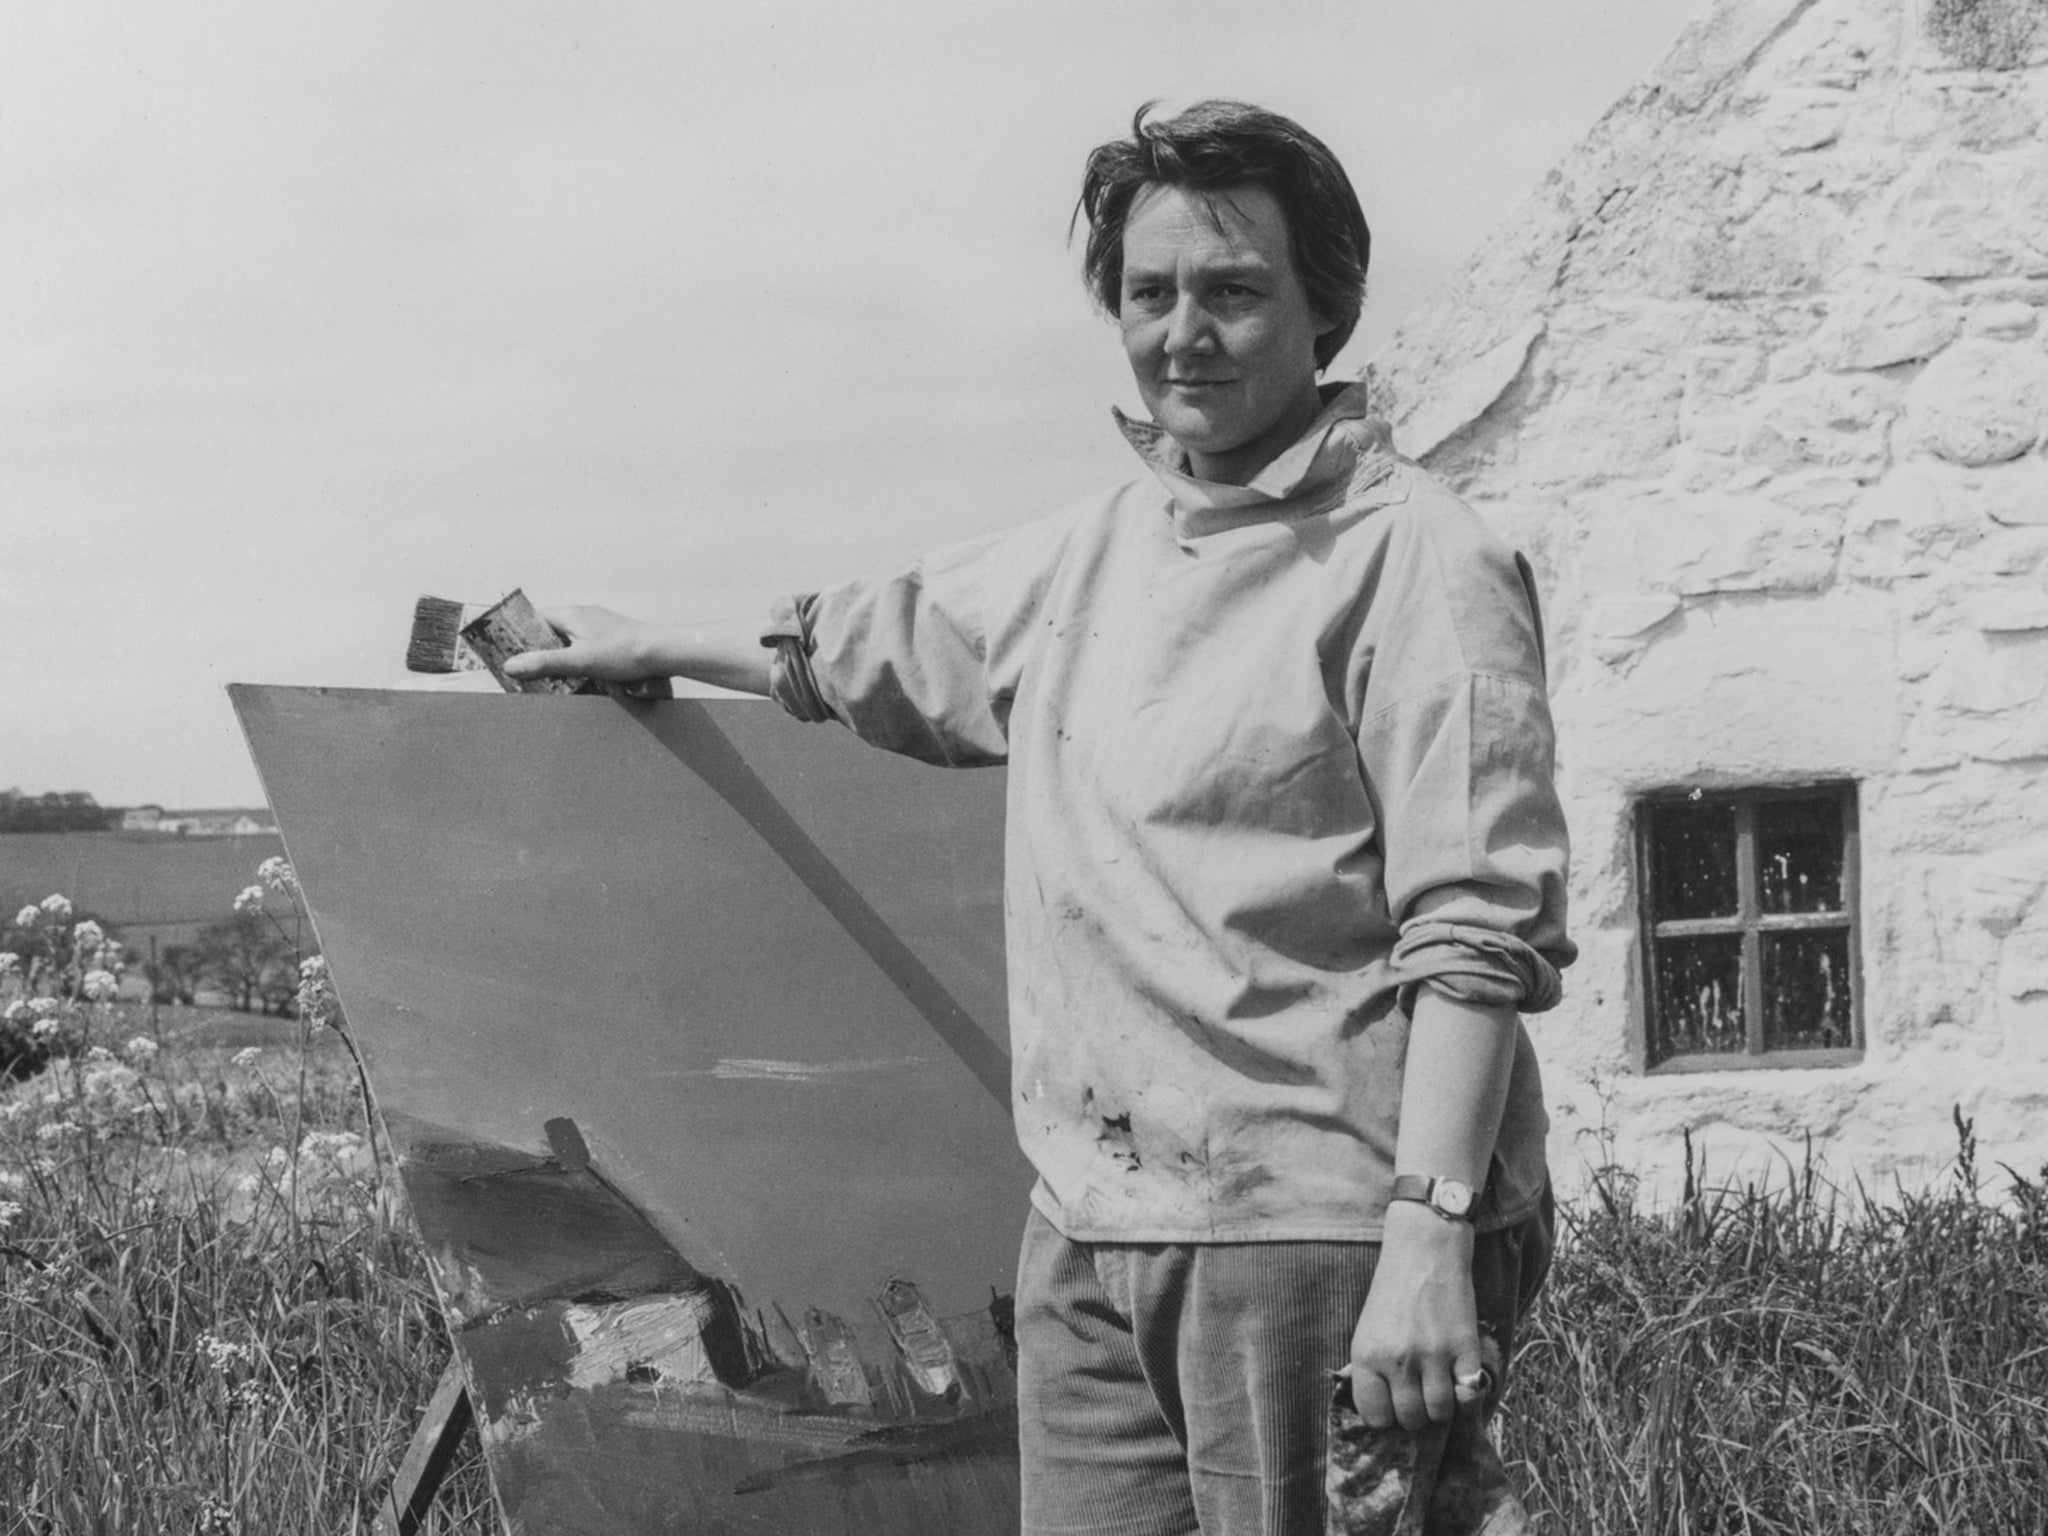 ‘This is a strange, strange place, it always excites me’ – Joan Eardley in Catterline 1961